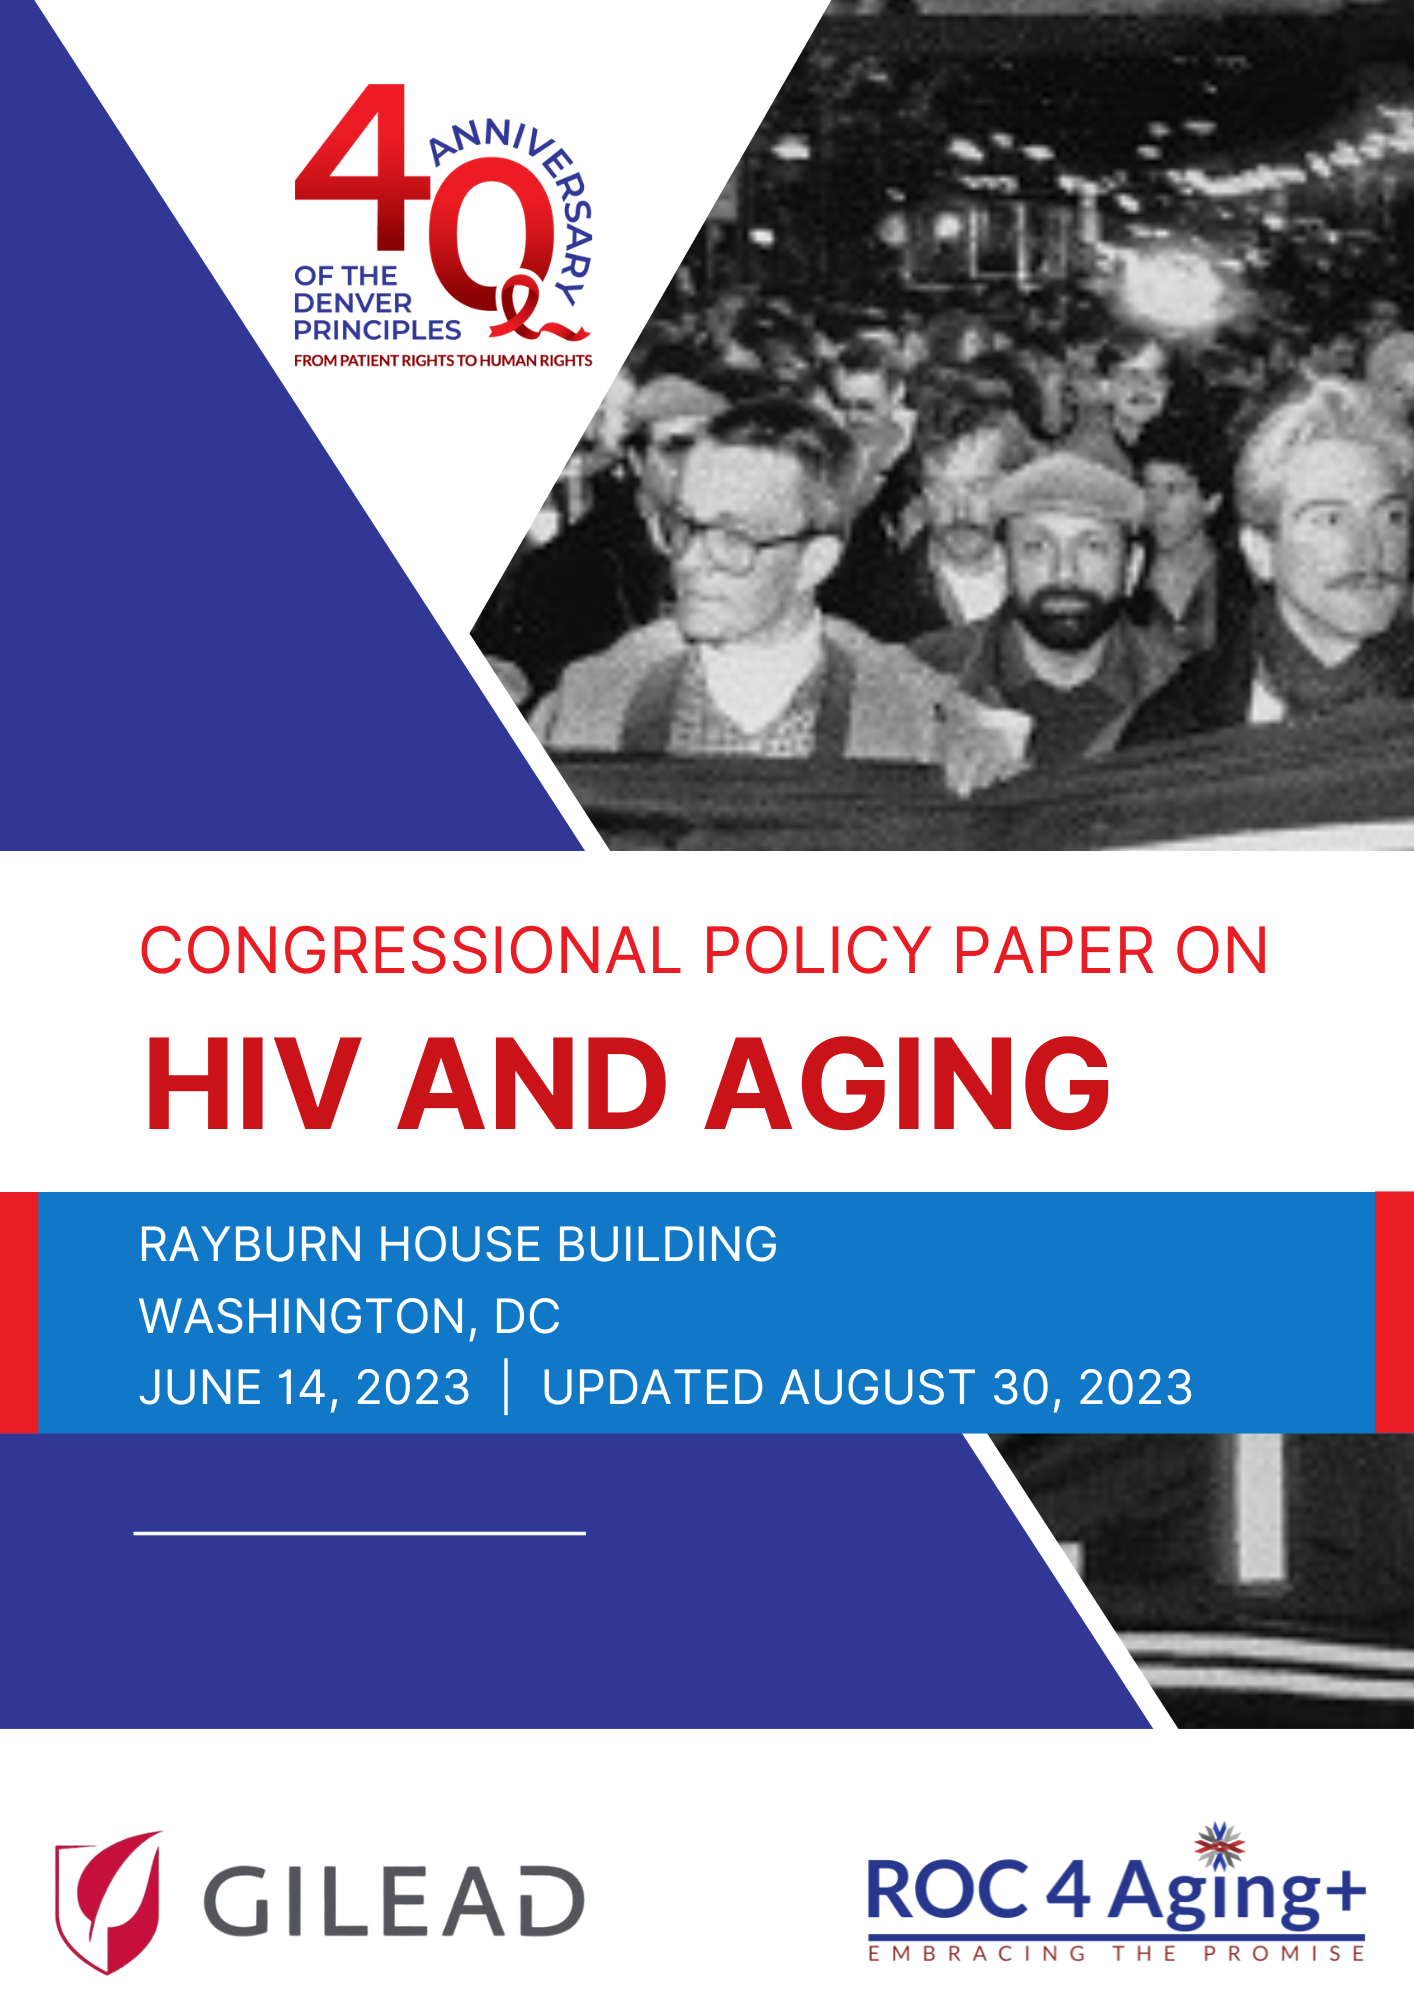 Congressional Policy Paper on HIV and Aging